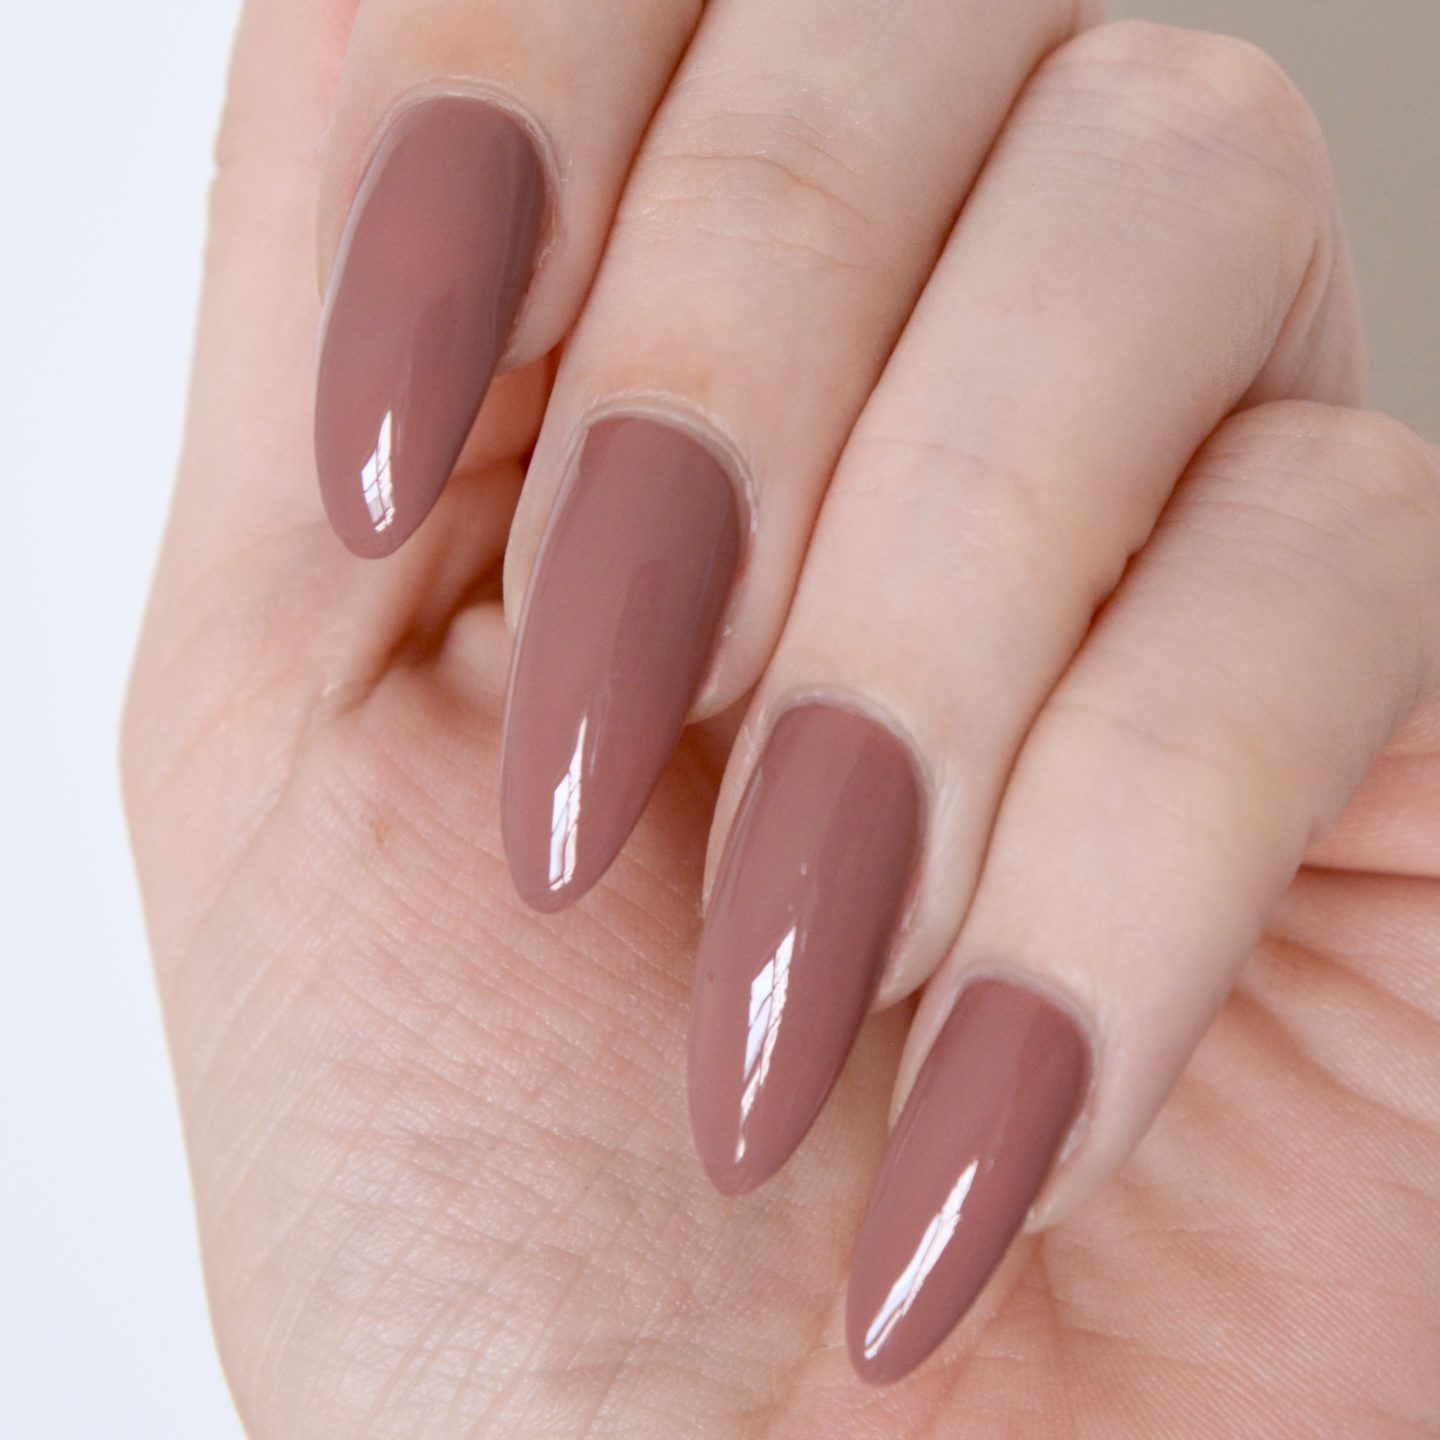 Essie Wild Nudes Collection 'Clothing Optional'